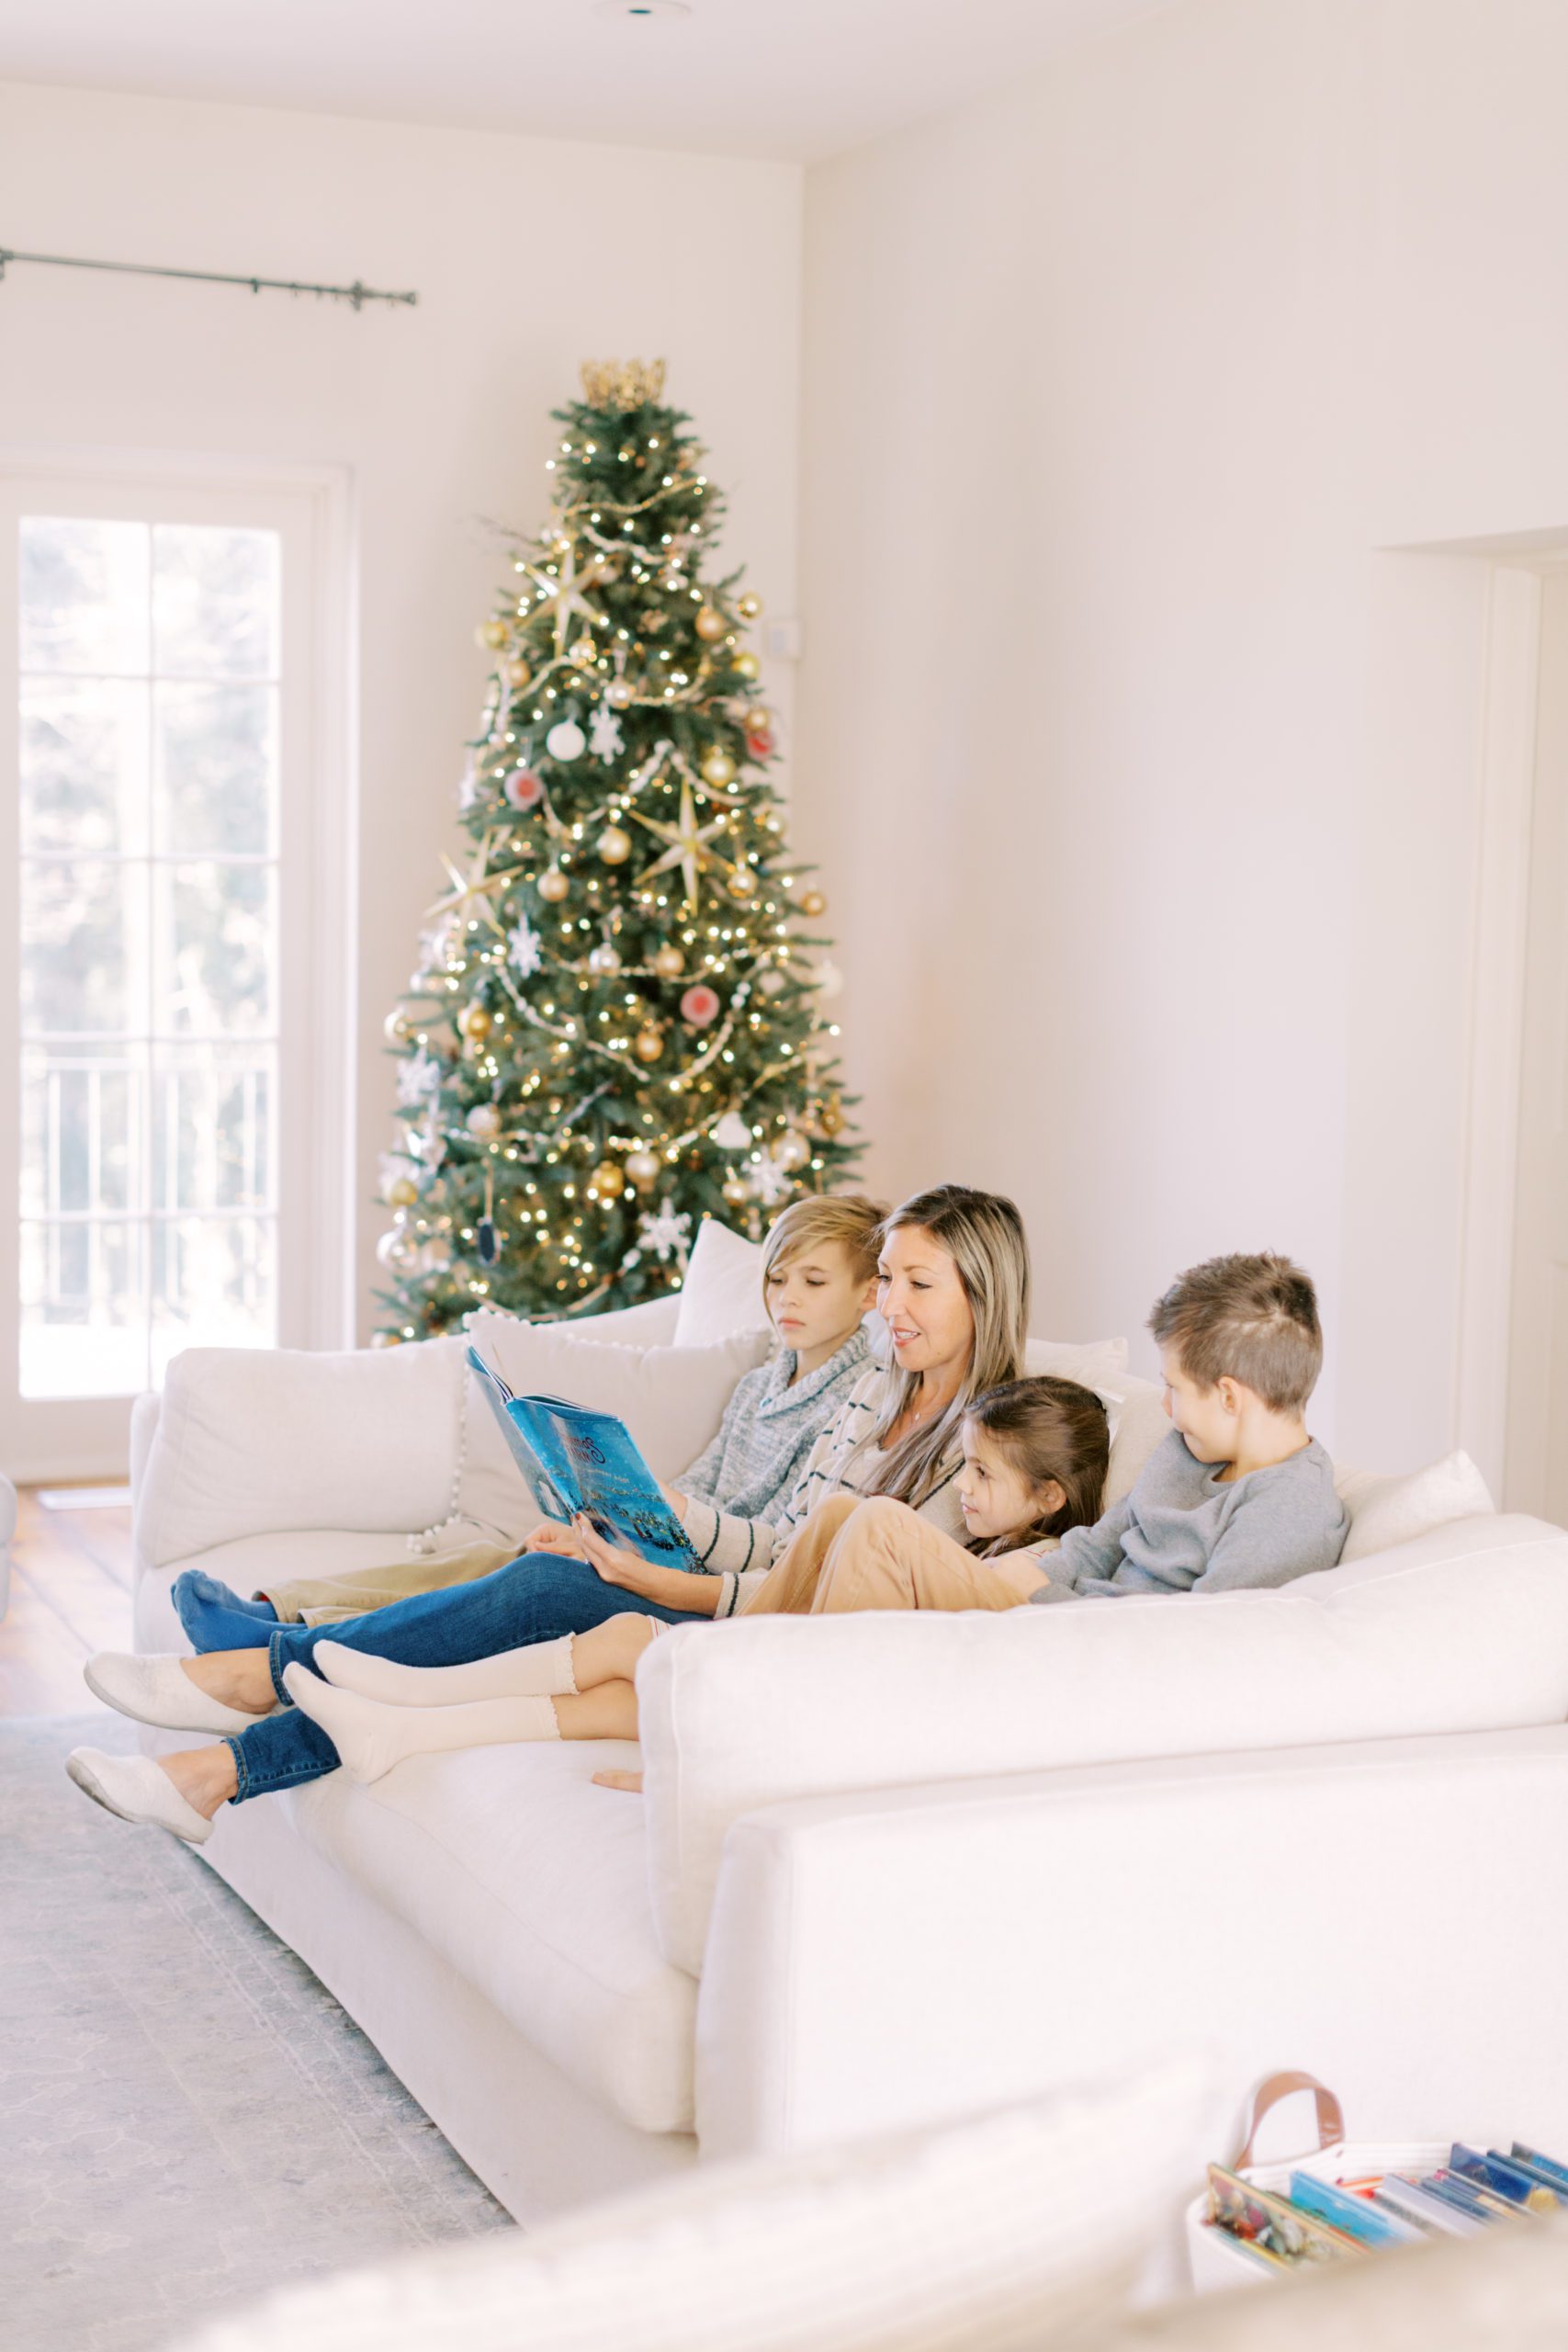 Momma reading a Christmas story to her kids by the tree